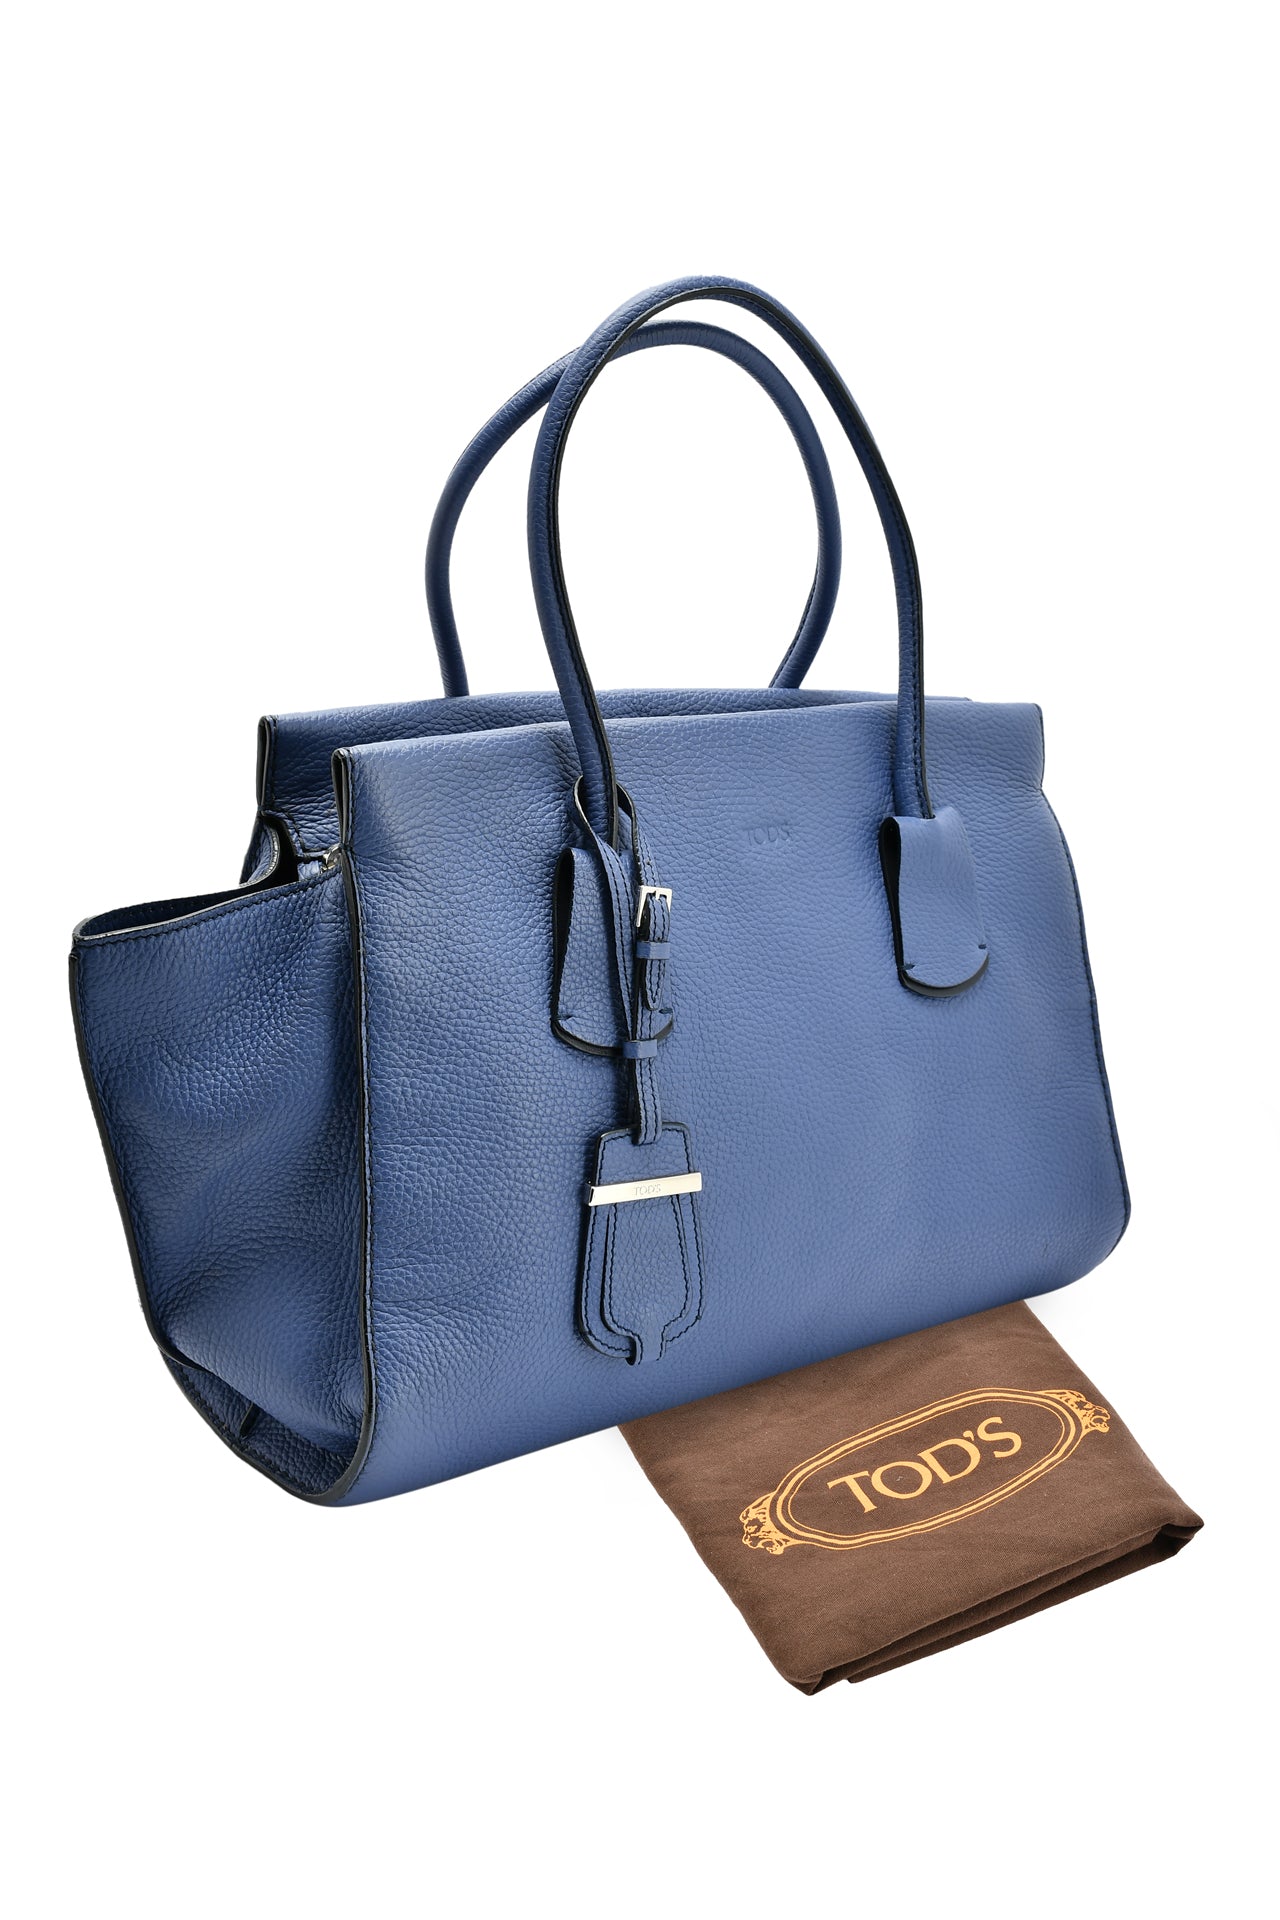 Tod's Blue Grained Leather Tote